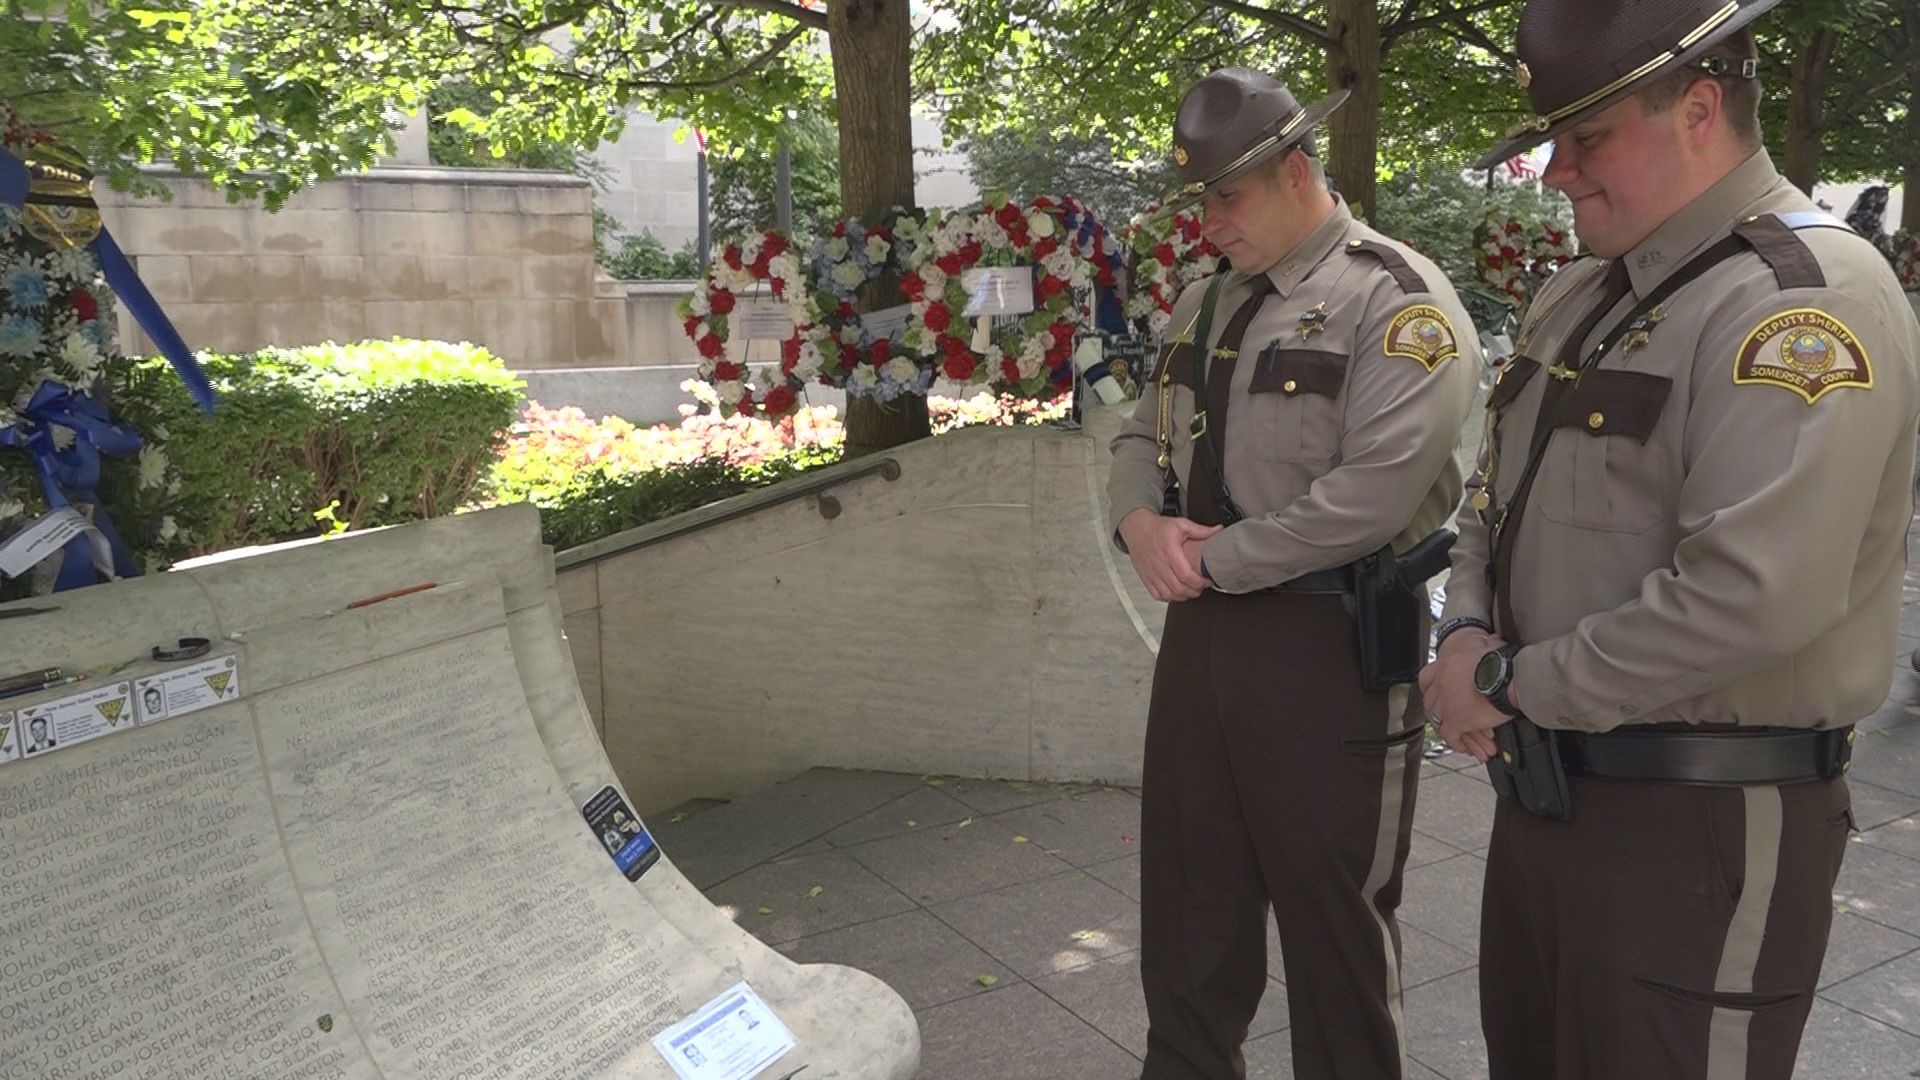 Officers from several departments across the state, including Somerset County Sheriff's Office visited the national memorial to pay their respects to the fallen sheriff's deputy.